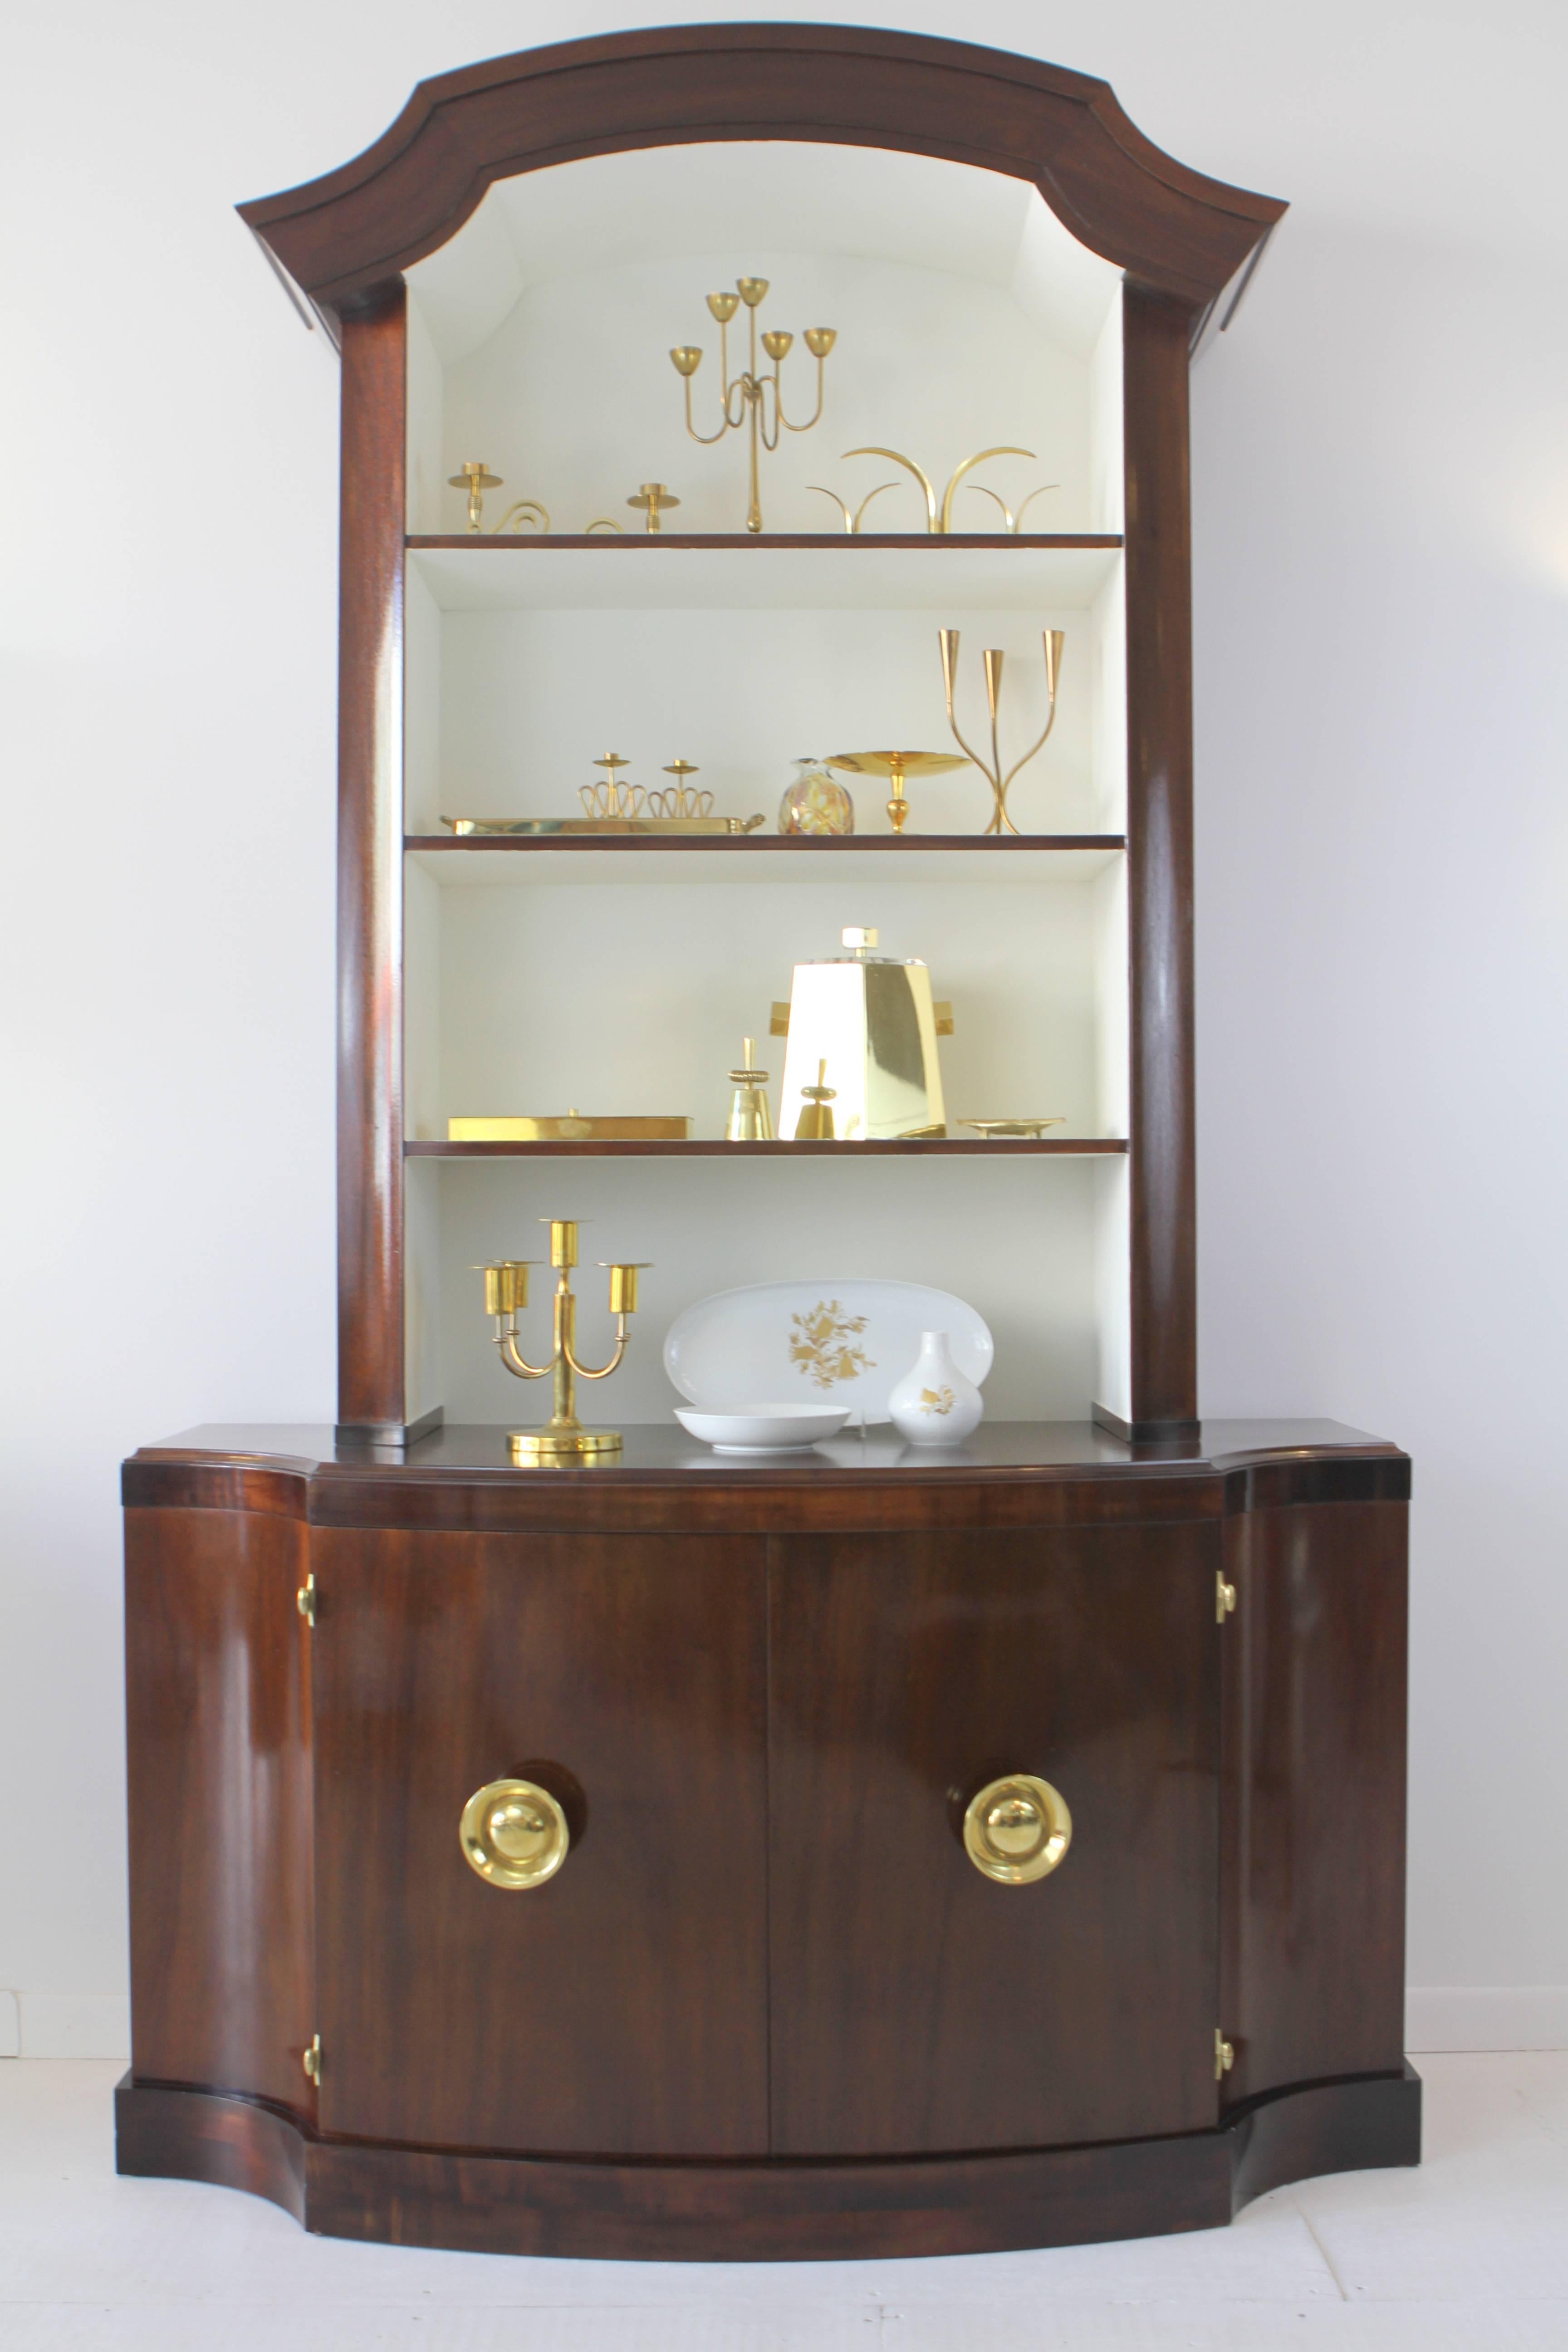 Elegant mahogany bookcase or dining hutch by Paul Frankl.  Amazing overscaled brass hardware on lower cabinet with original Tiffany Blue interior.  Upper bookcase with lacquered creamy white interior contrast with refinished mahogany case with